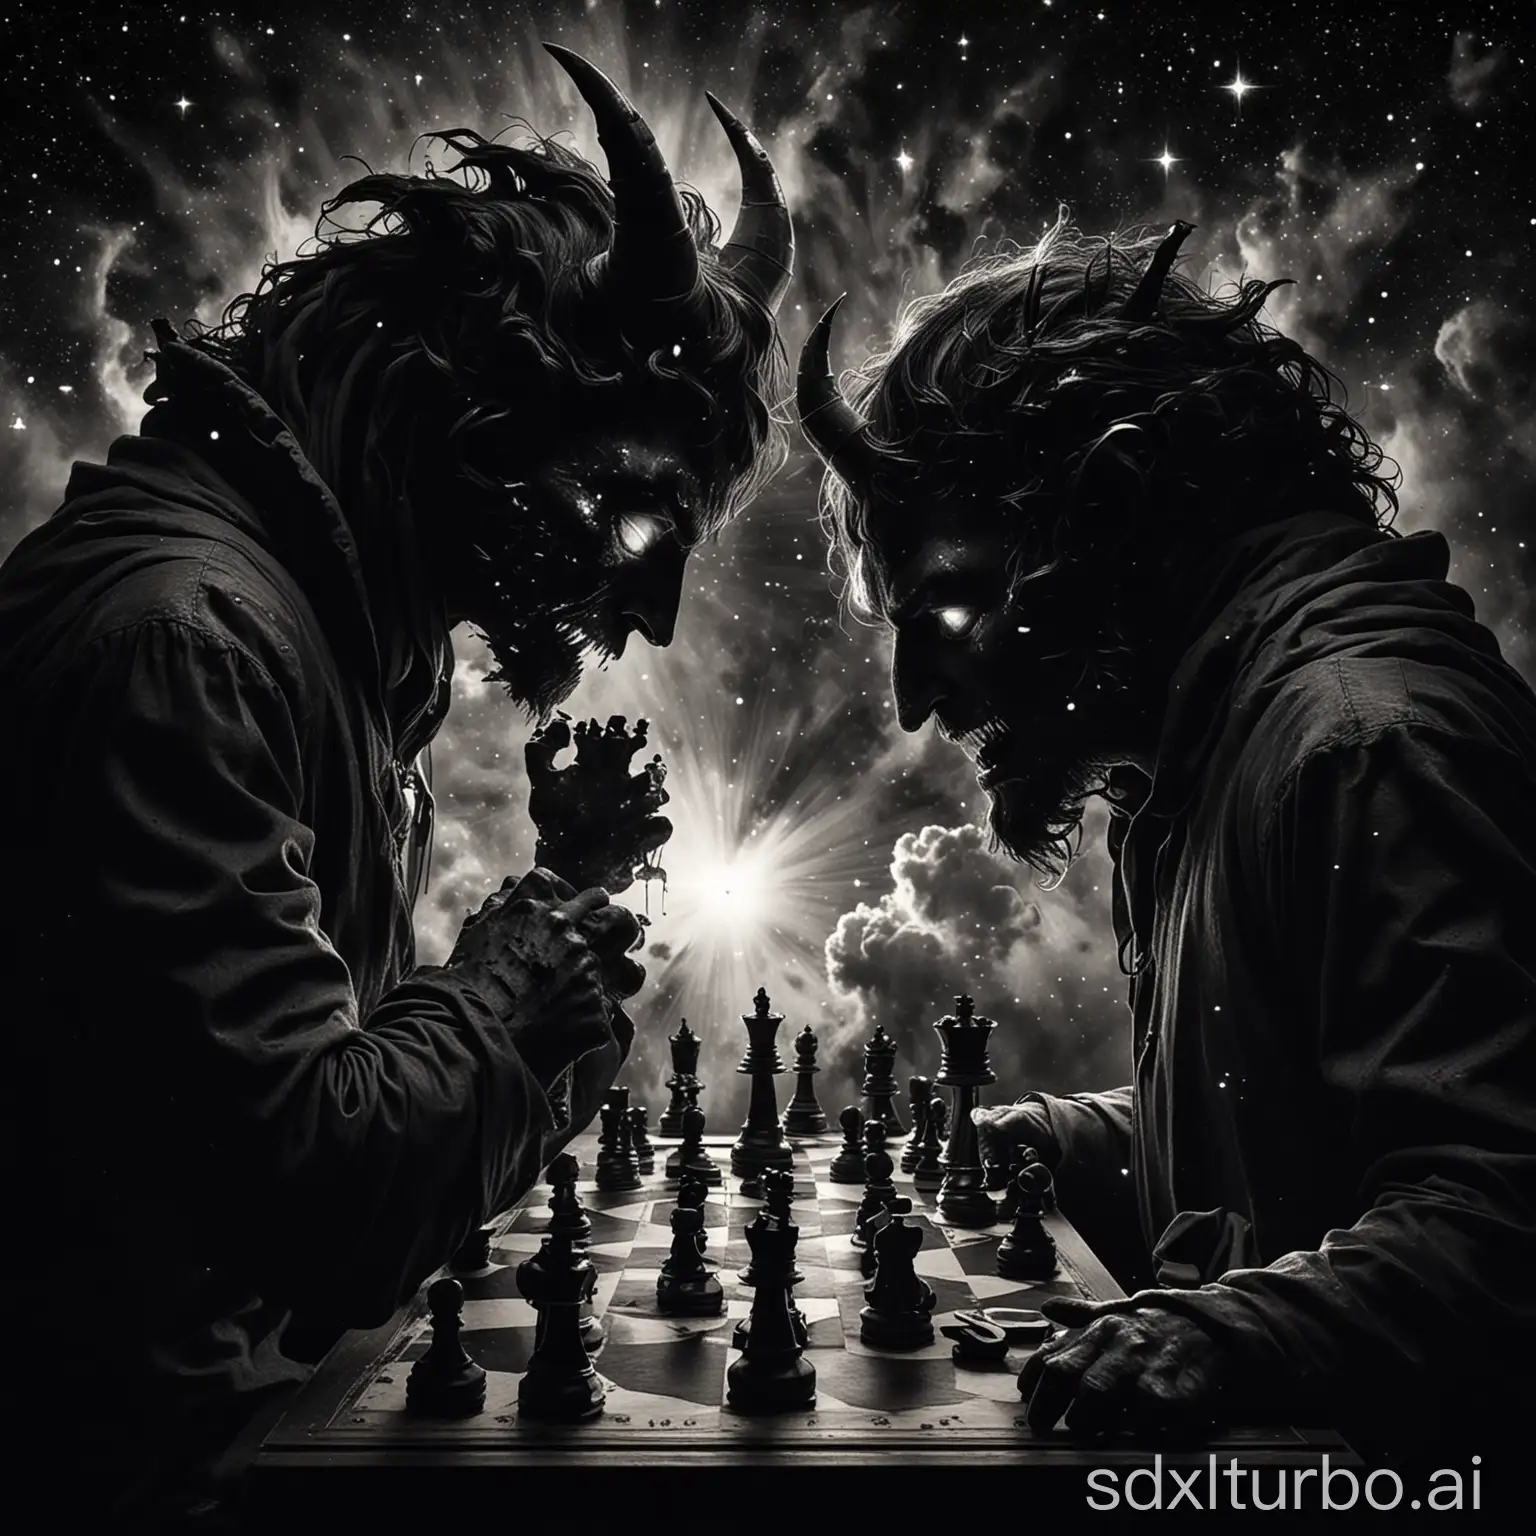 I want you to imagine two dark demons playing chess in a silhouette against the backdrop of a black hole where stars are exploding!